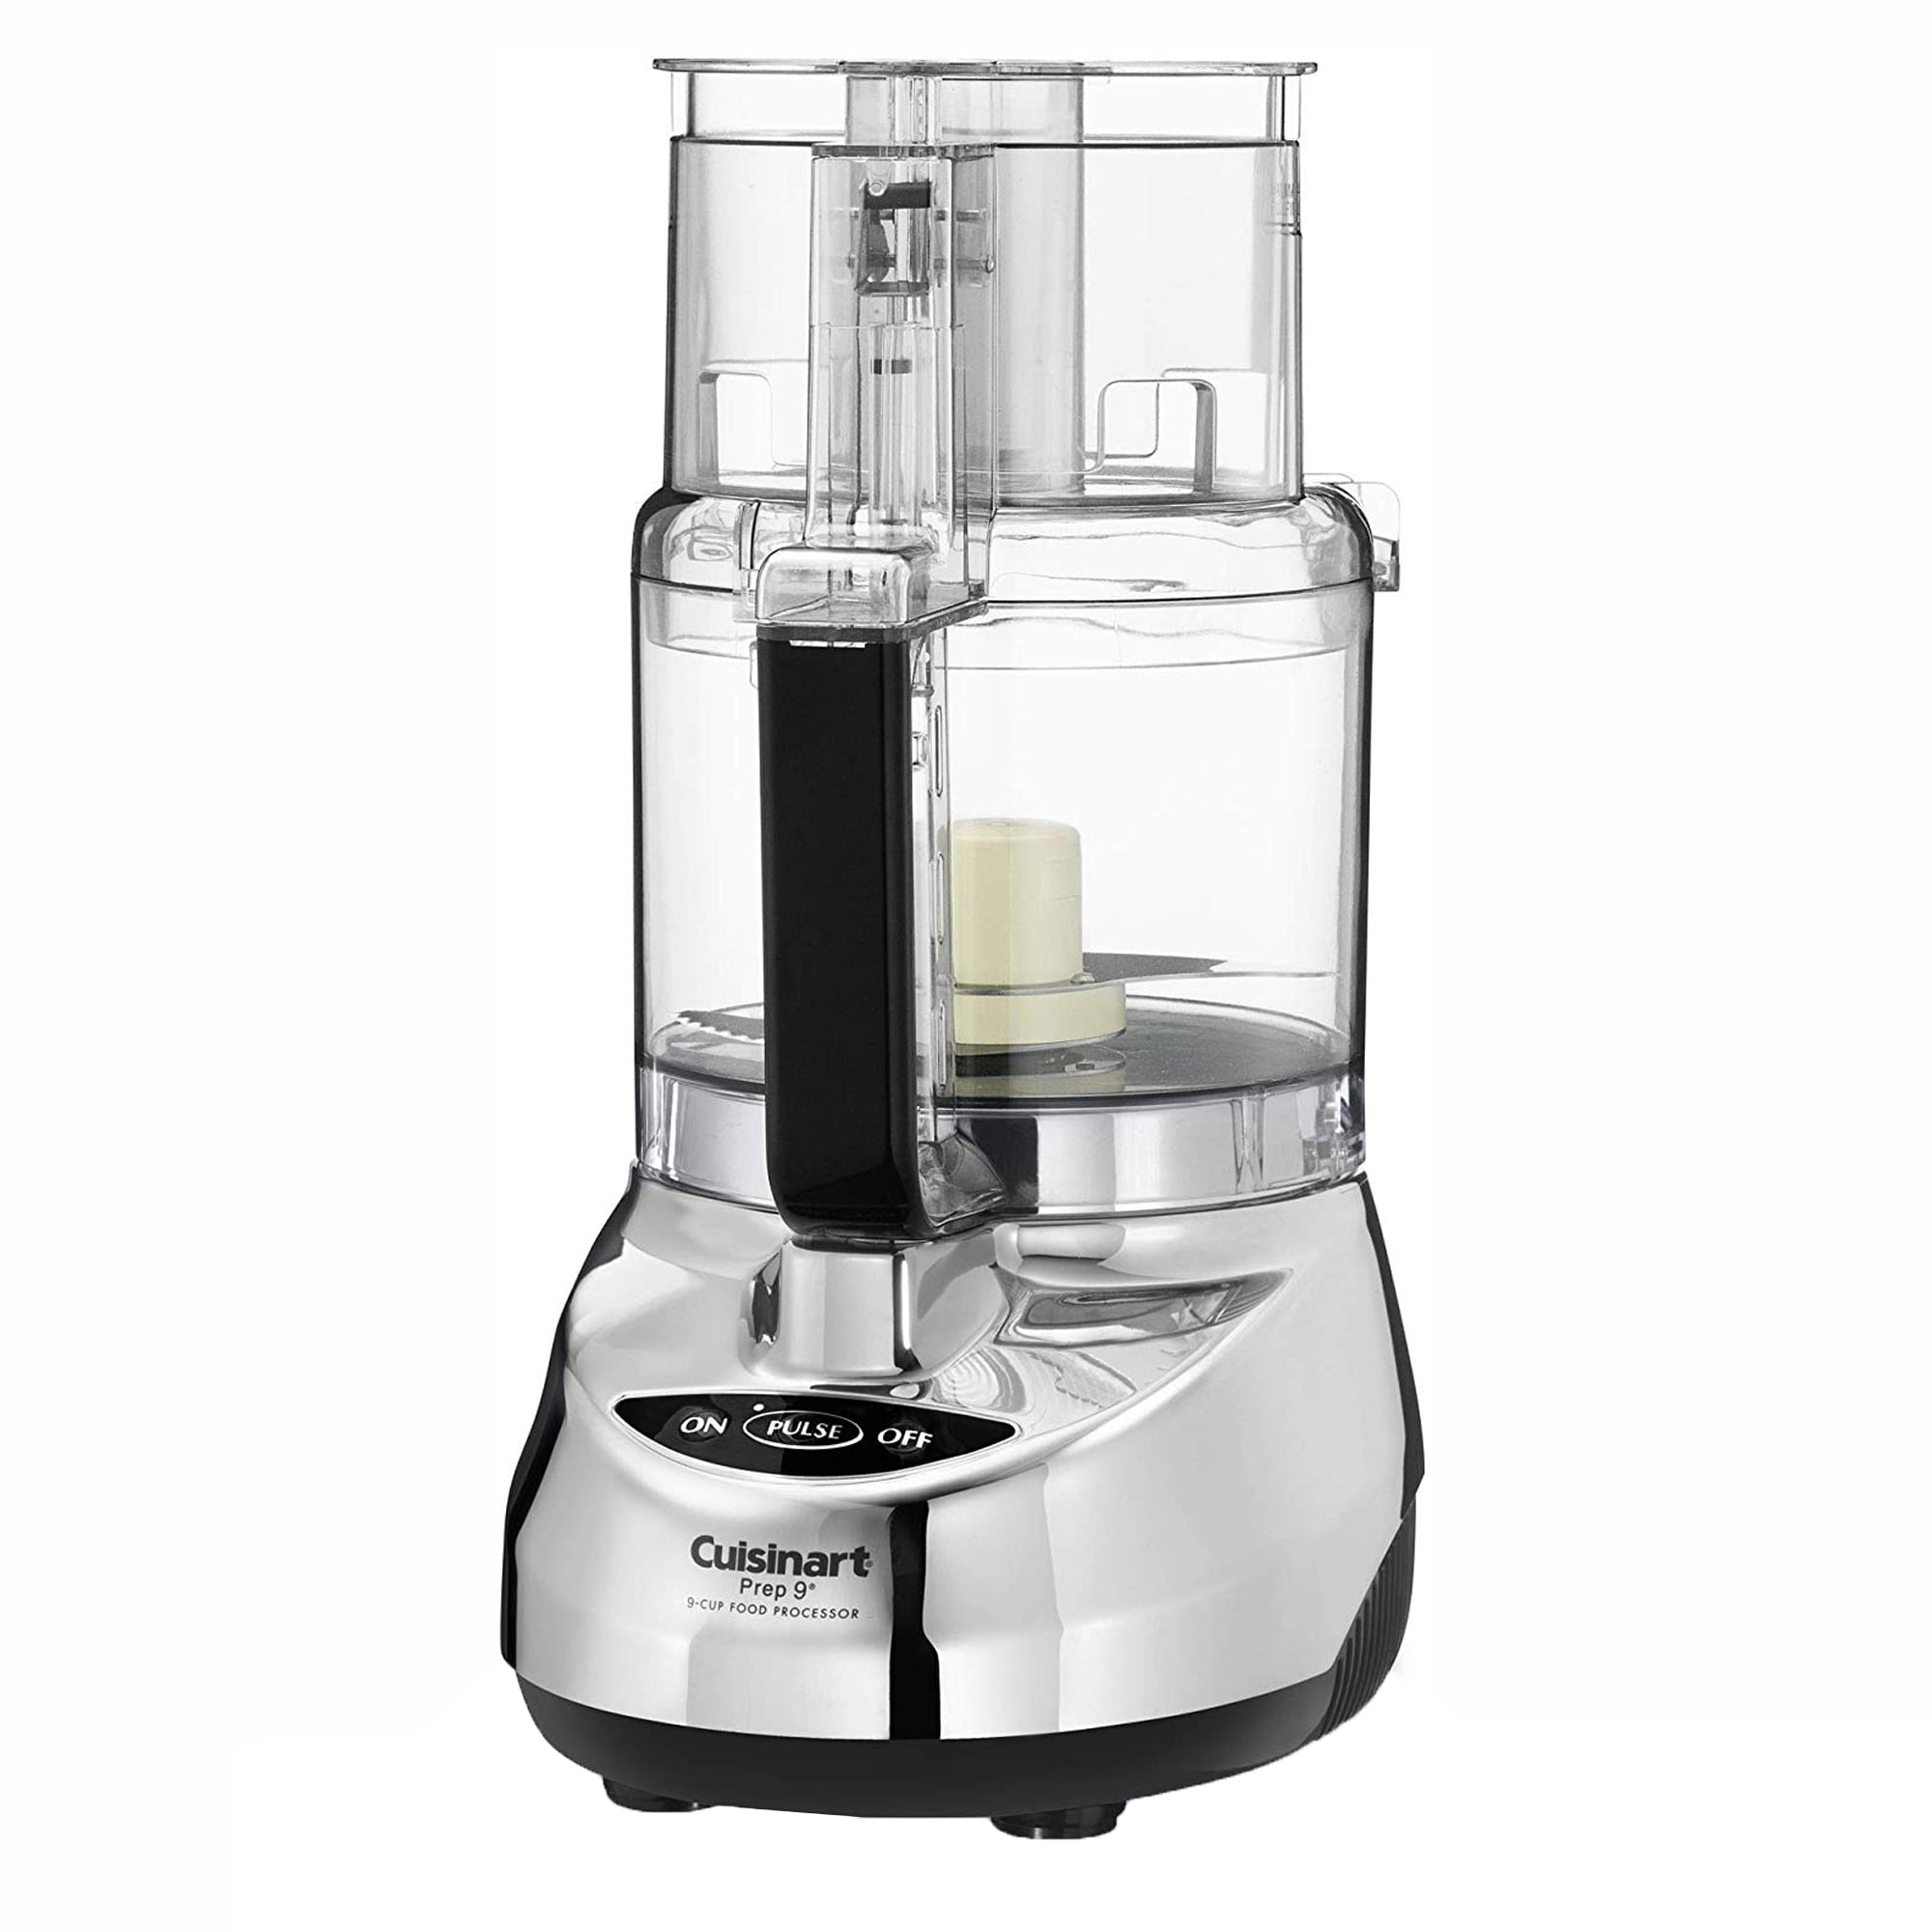 Cuisinart Prep 9 9-Cup Food Processor, Stainless Steel